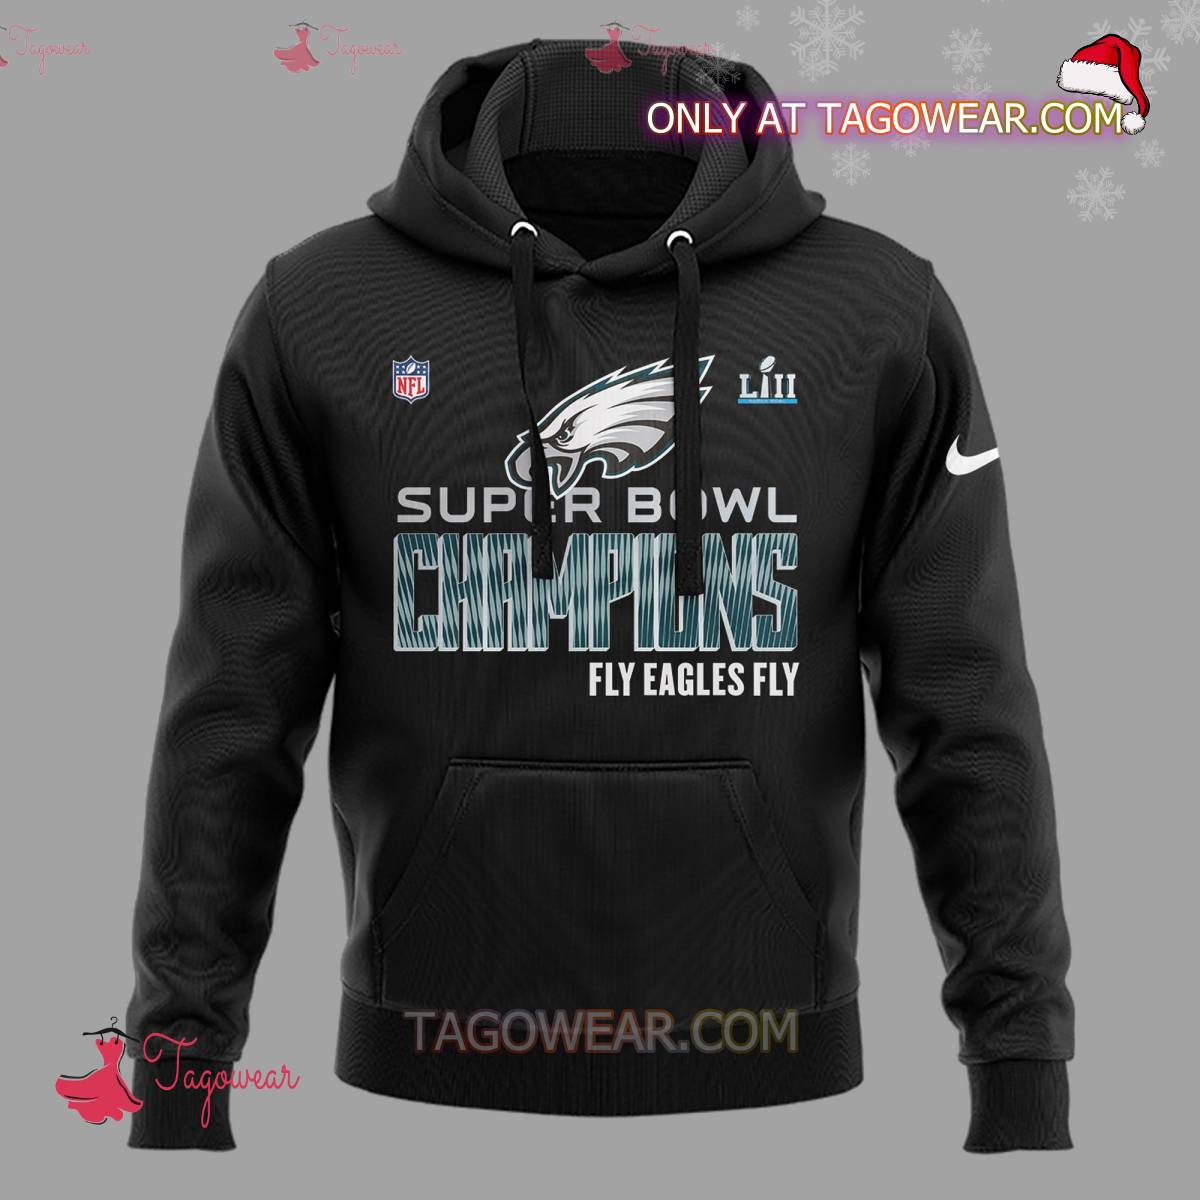 Mrs Marie Nfl Philadelphia Eagles Big Fans Super Bowl Champions Fly Eagles Fly Hoodie a